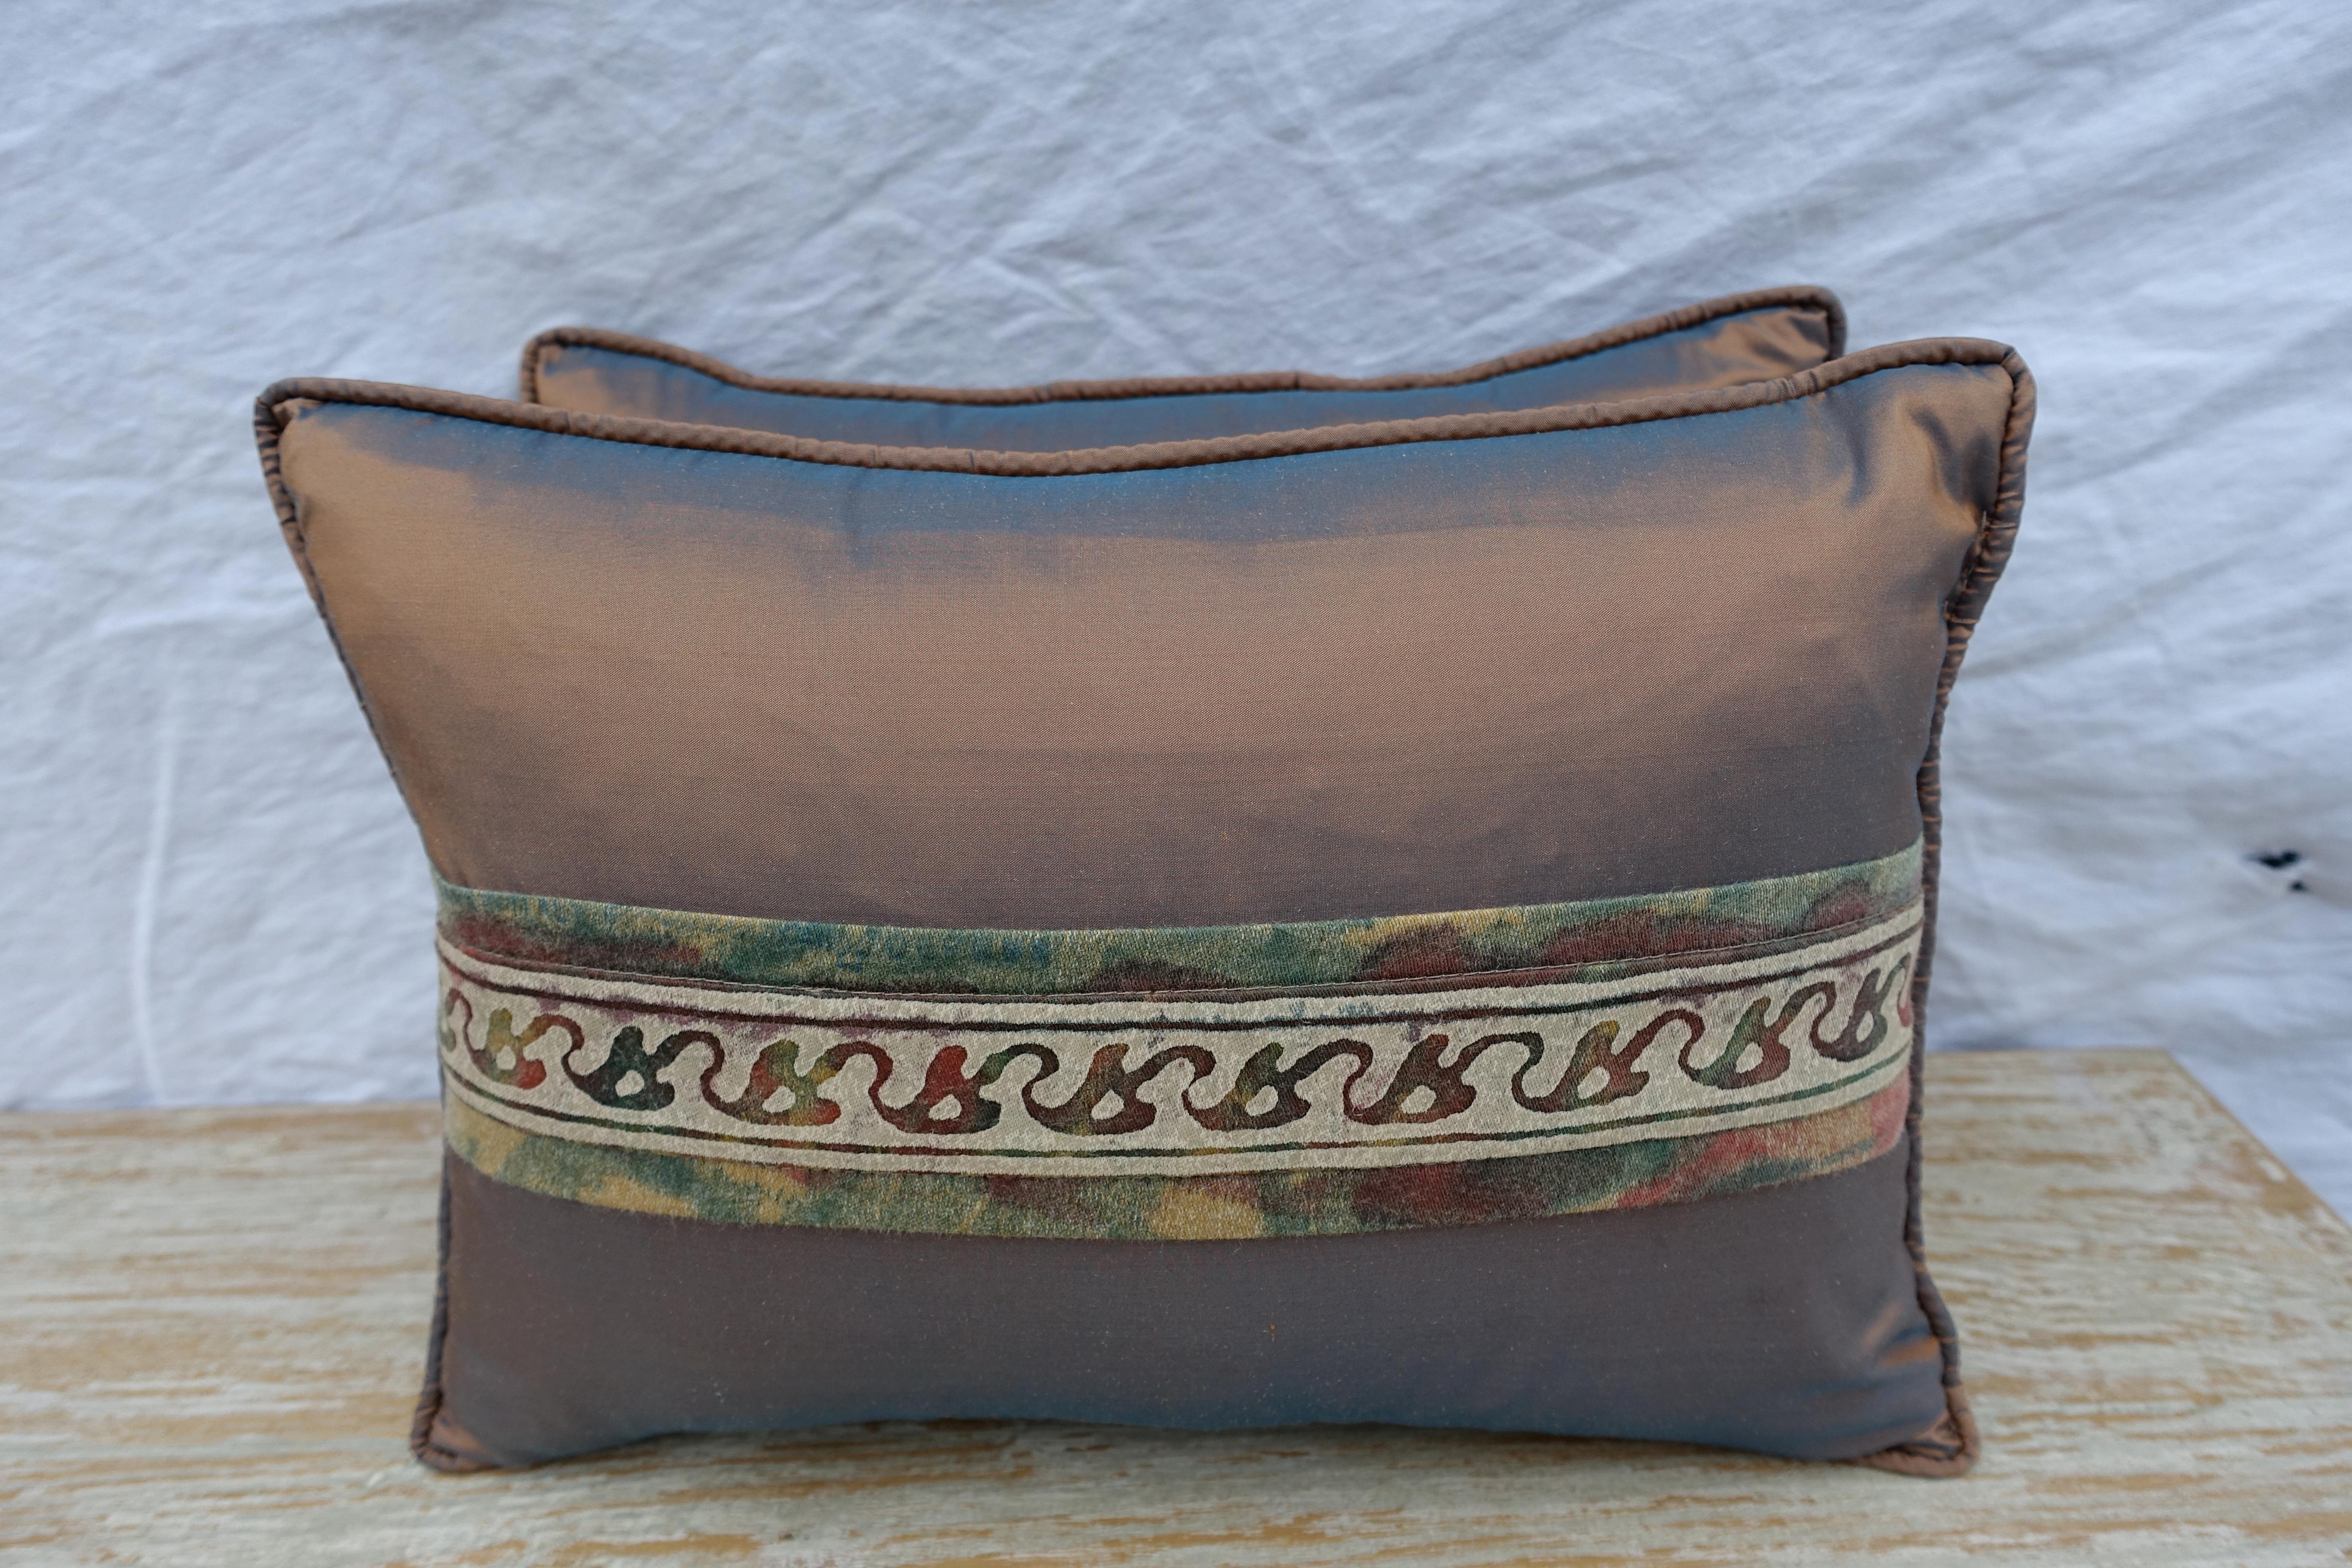 Pair of custom pillows made with vintage fortuny textile border combined with contemporary copper colored silk taffeta. Self cord detail. Down inserts, sewn closed.